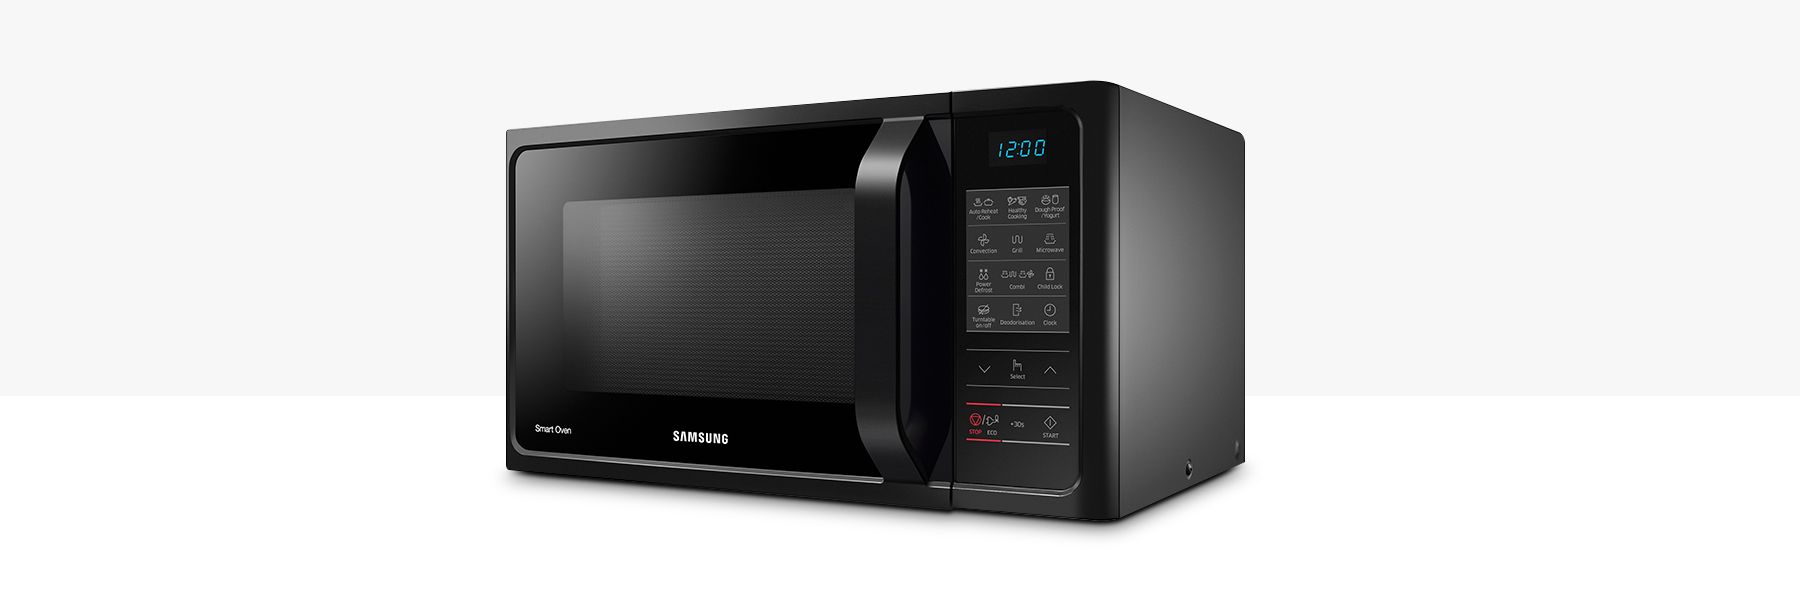 An example of a microwave